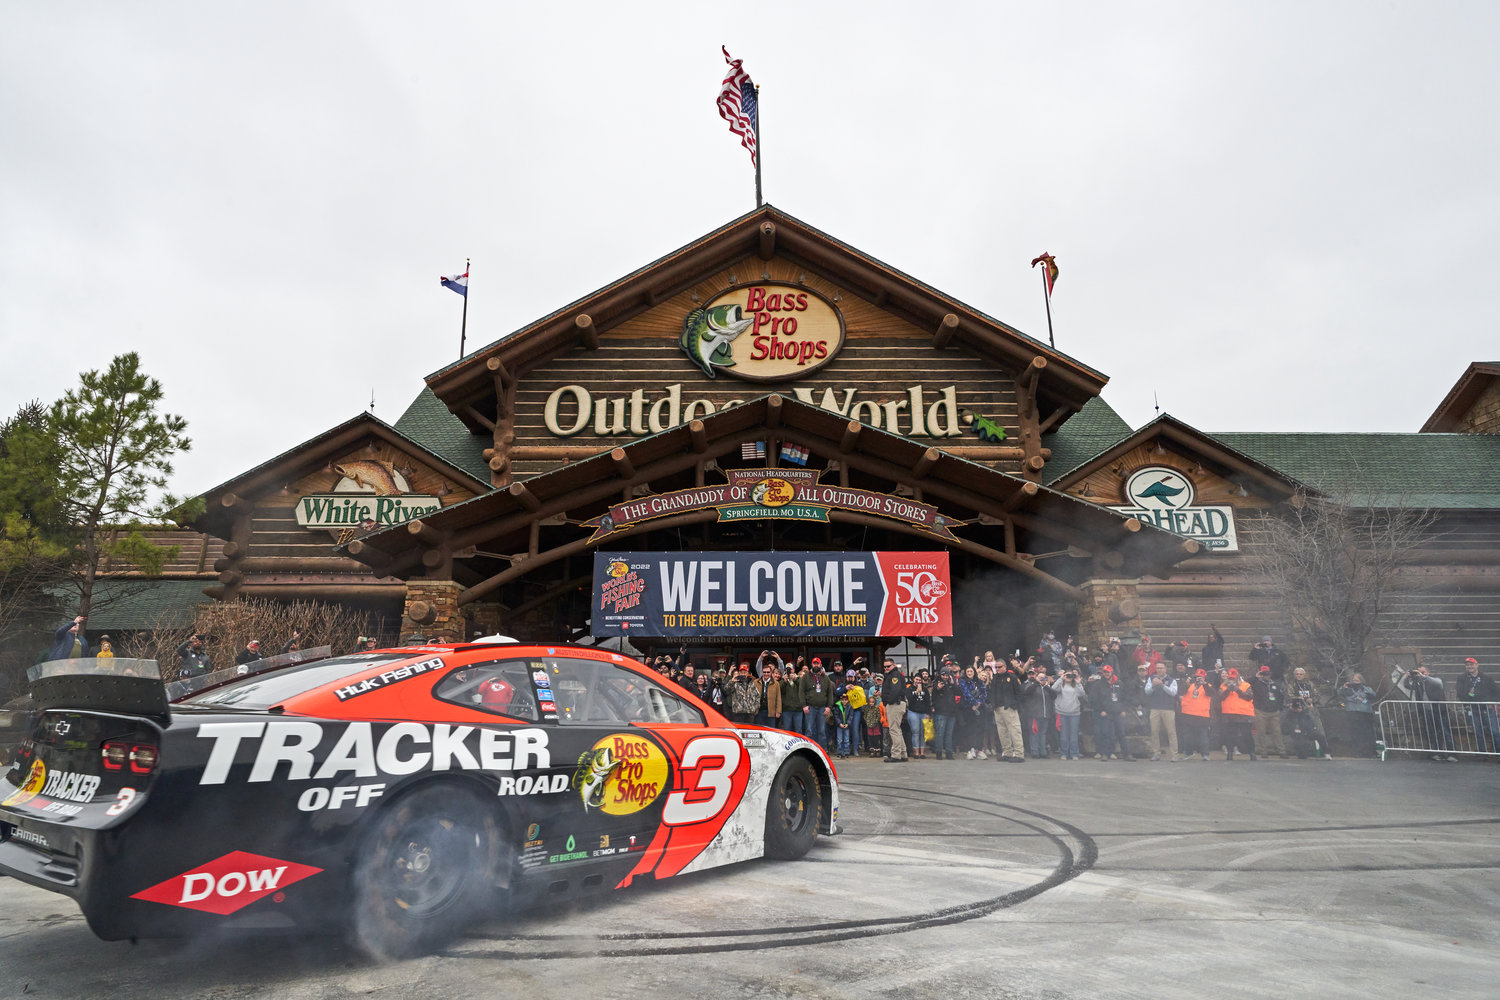 NACAR driver Auston Dillon, in his No. 3 vehicle sponsored by Bass Pro Shops, surprises the crowd at the World’s Fishing Fair by performing burnouts and doughnuts Thursday morning.